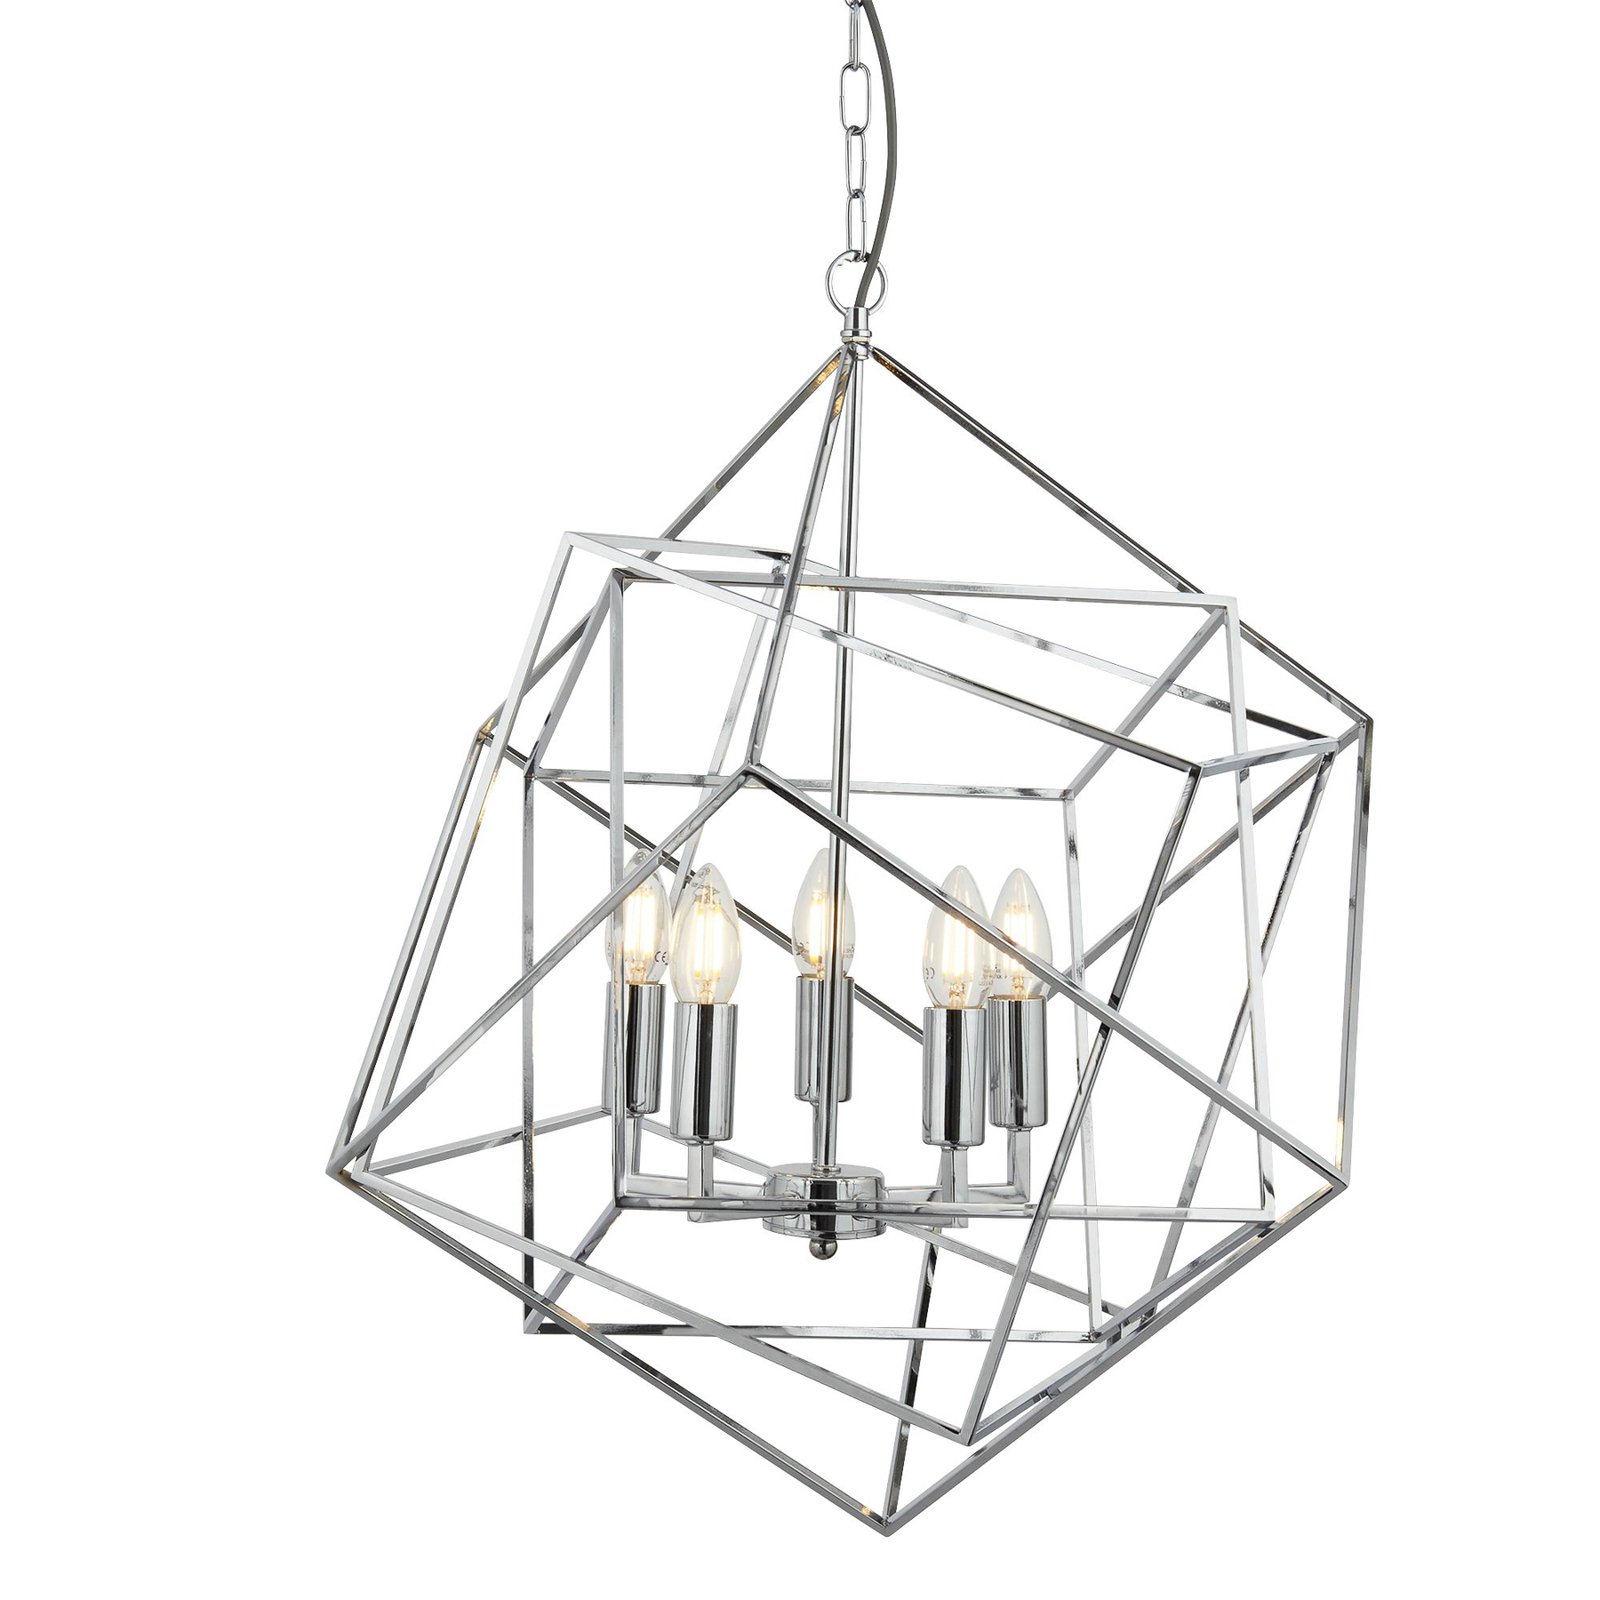 Cube pendant light cage lampshade